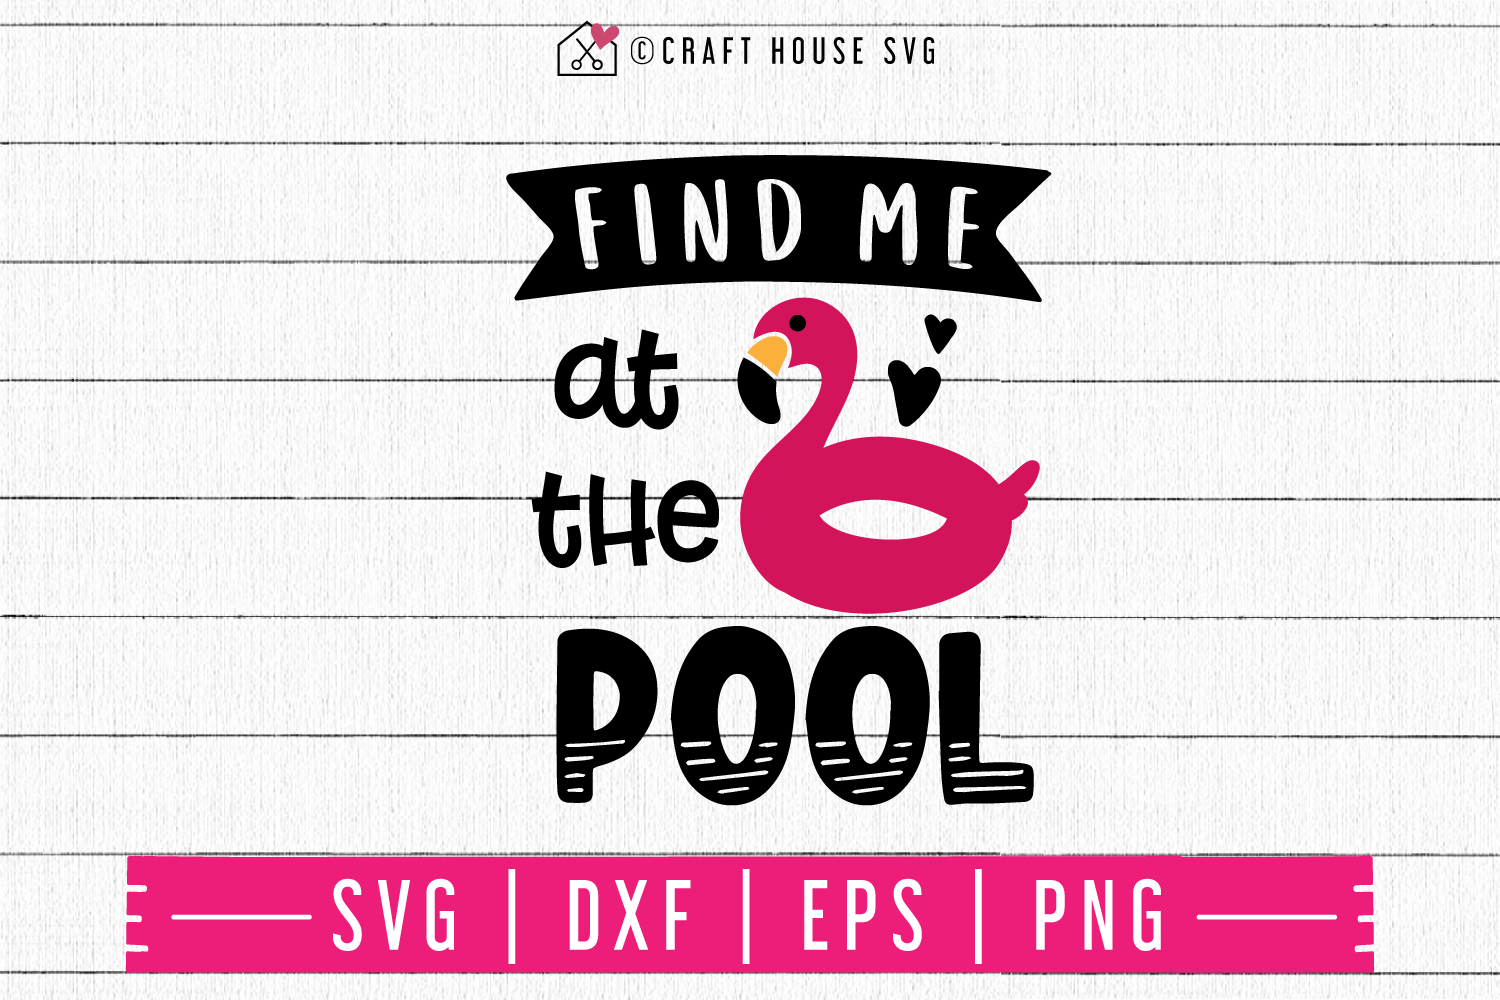 Find me at the pool SVG | M48F | A Summer SVG cut file Craft House SVG - SVG files for Cricut and Silhouette